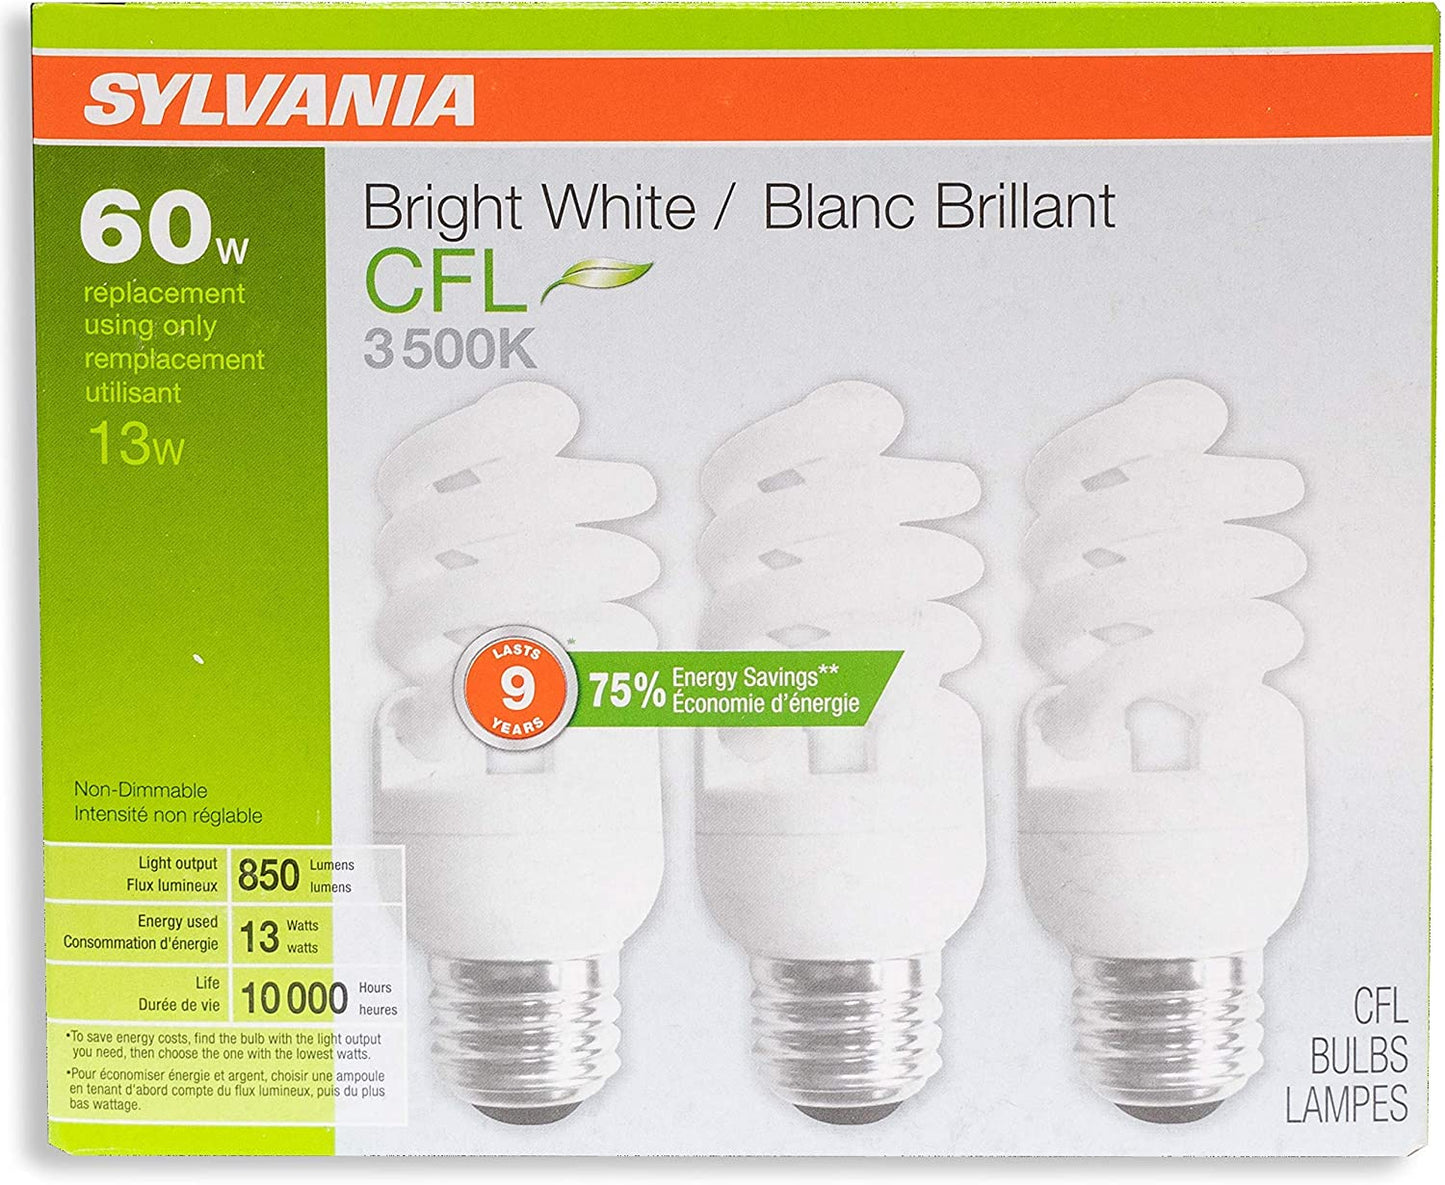 13W CFL T2 Spiral Light Bulb, 60W Equivalent, 850 Lumens, 2700K Soft White, Non-Dimmable (8-Pack)